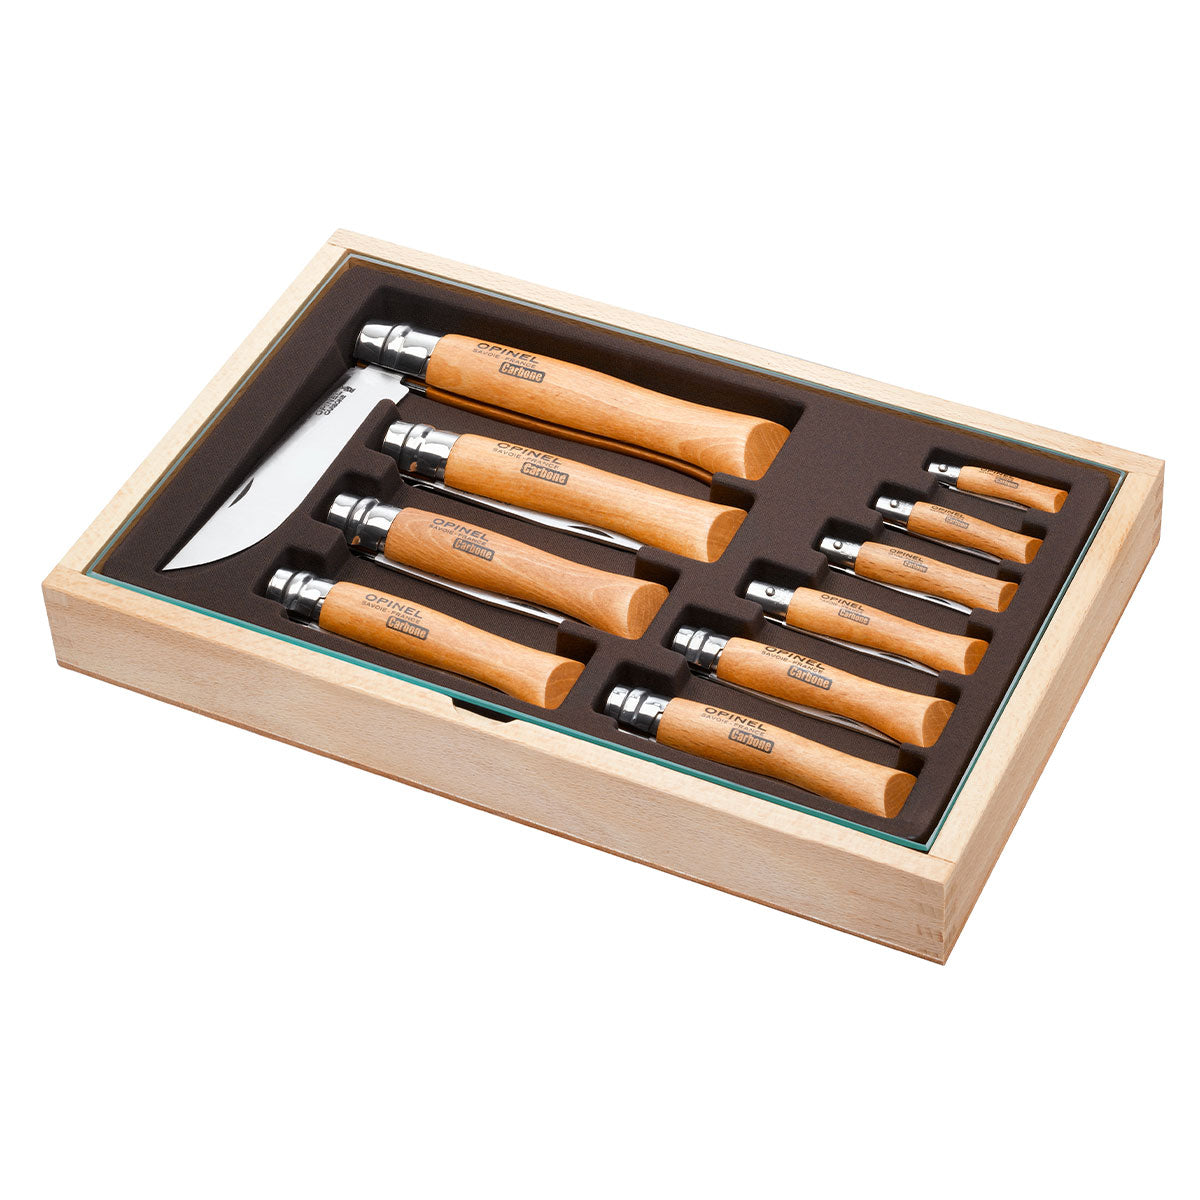 TRADITIONAL CLASSIC CHANGE TRAY OF 10 CARBON STEEL OPINAL KNIVES